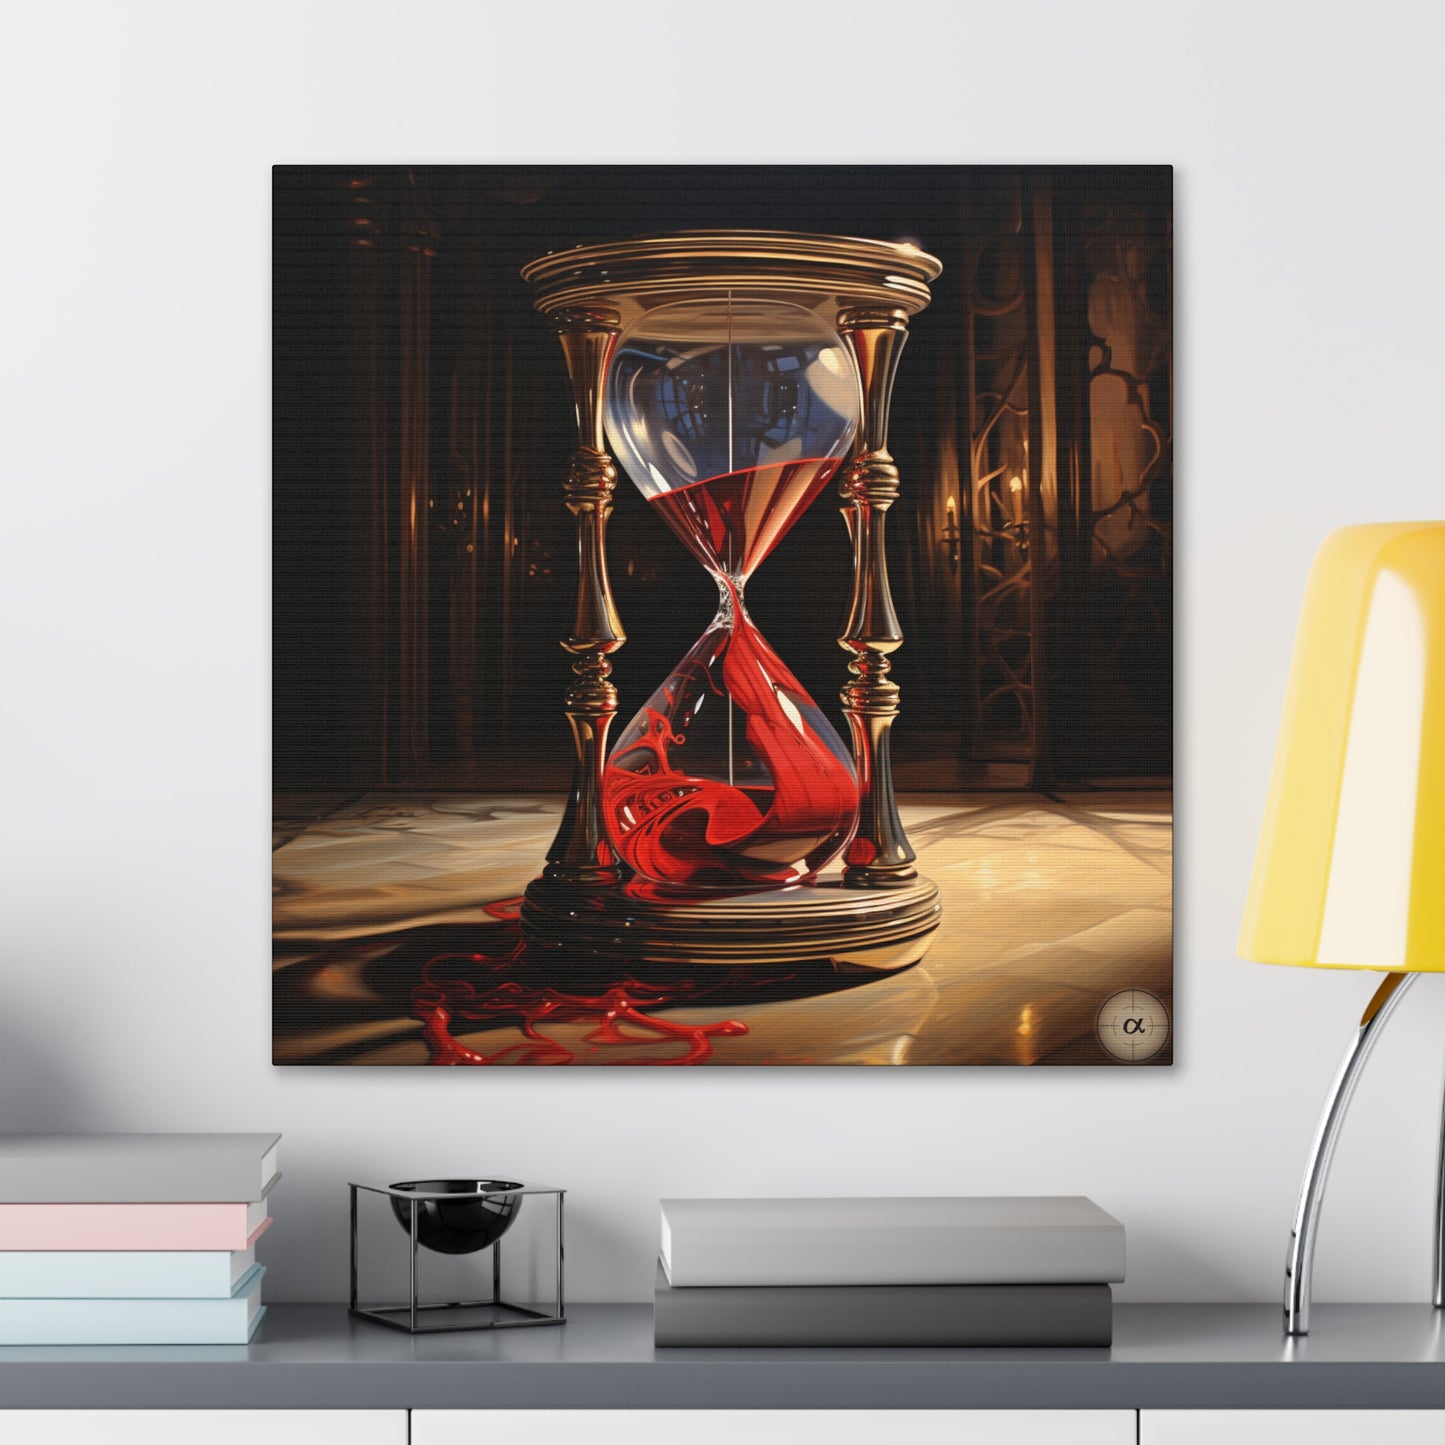 Art by Kendyll: "The Blood of Time" on Canvas